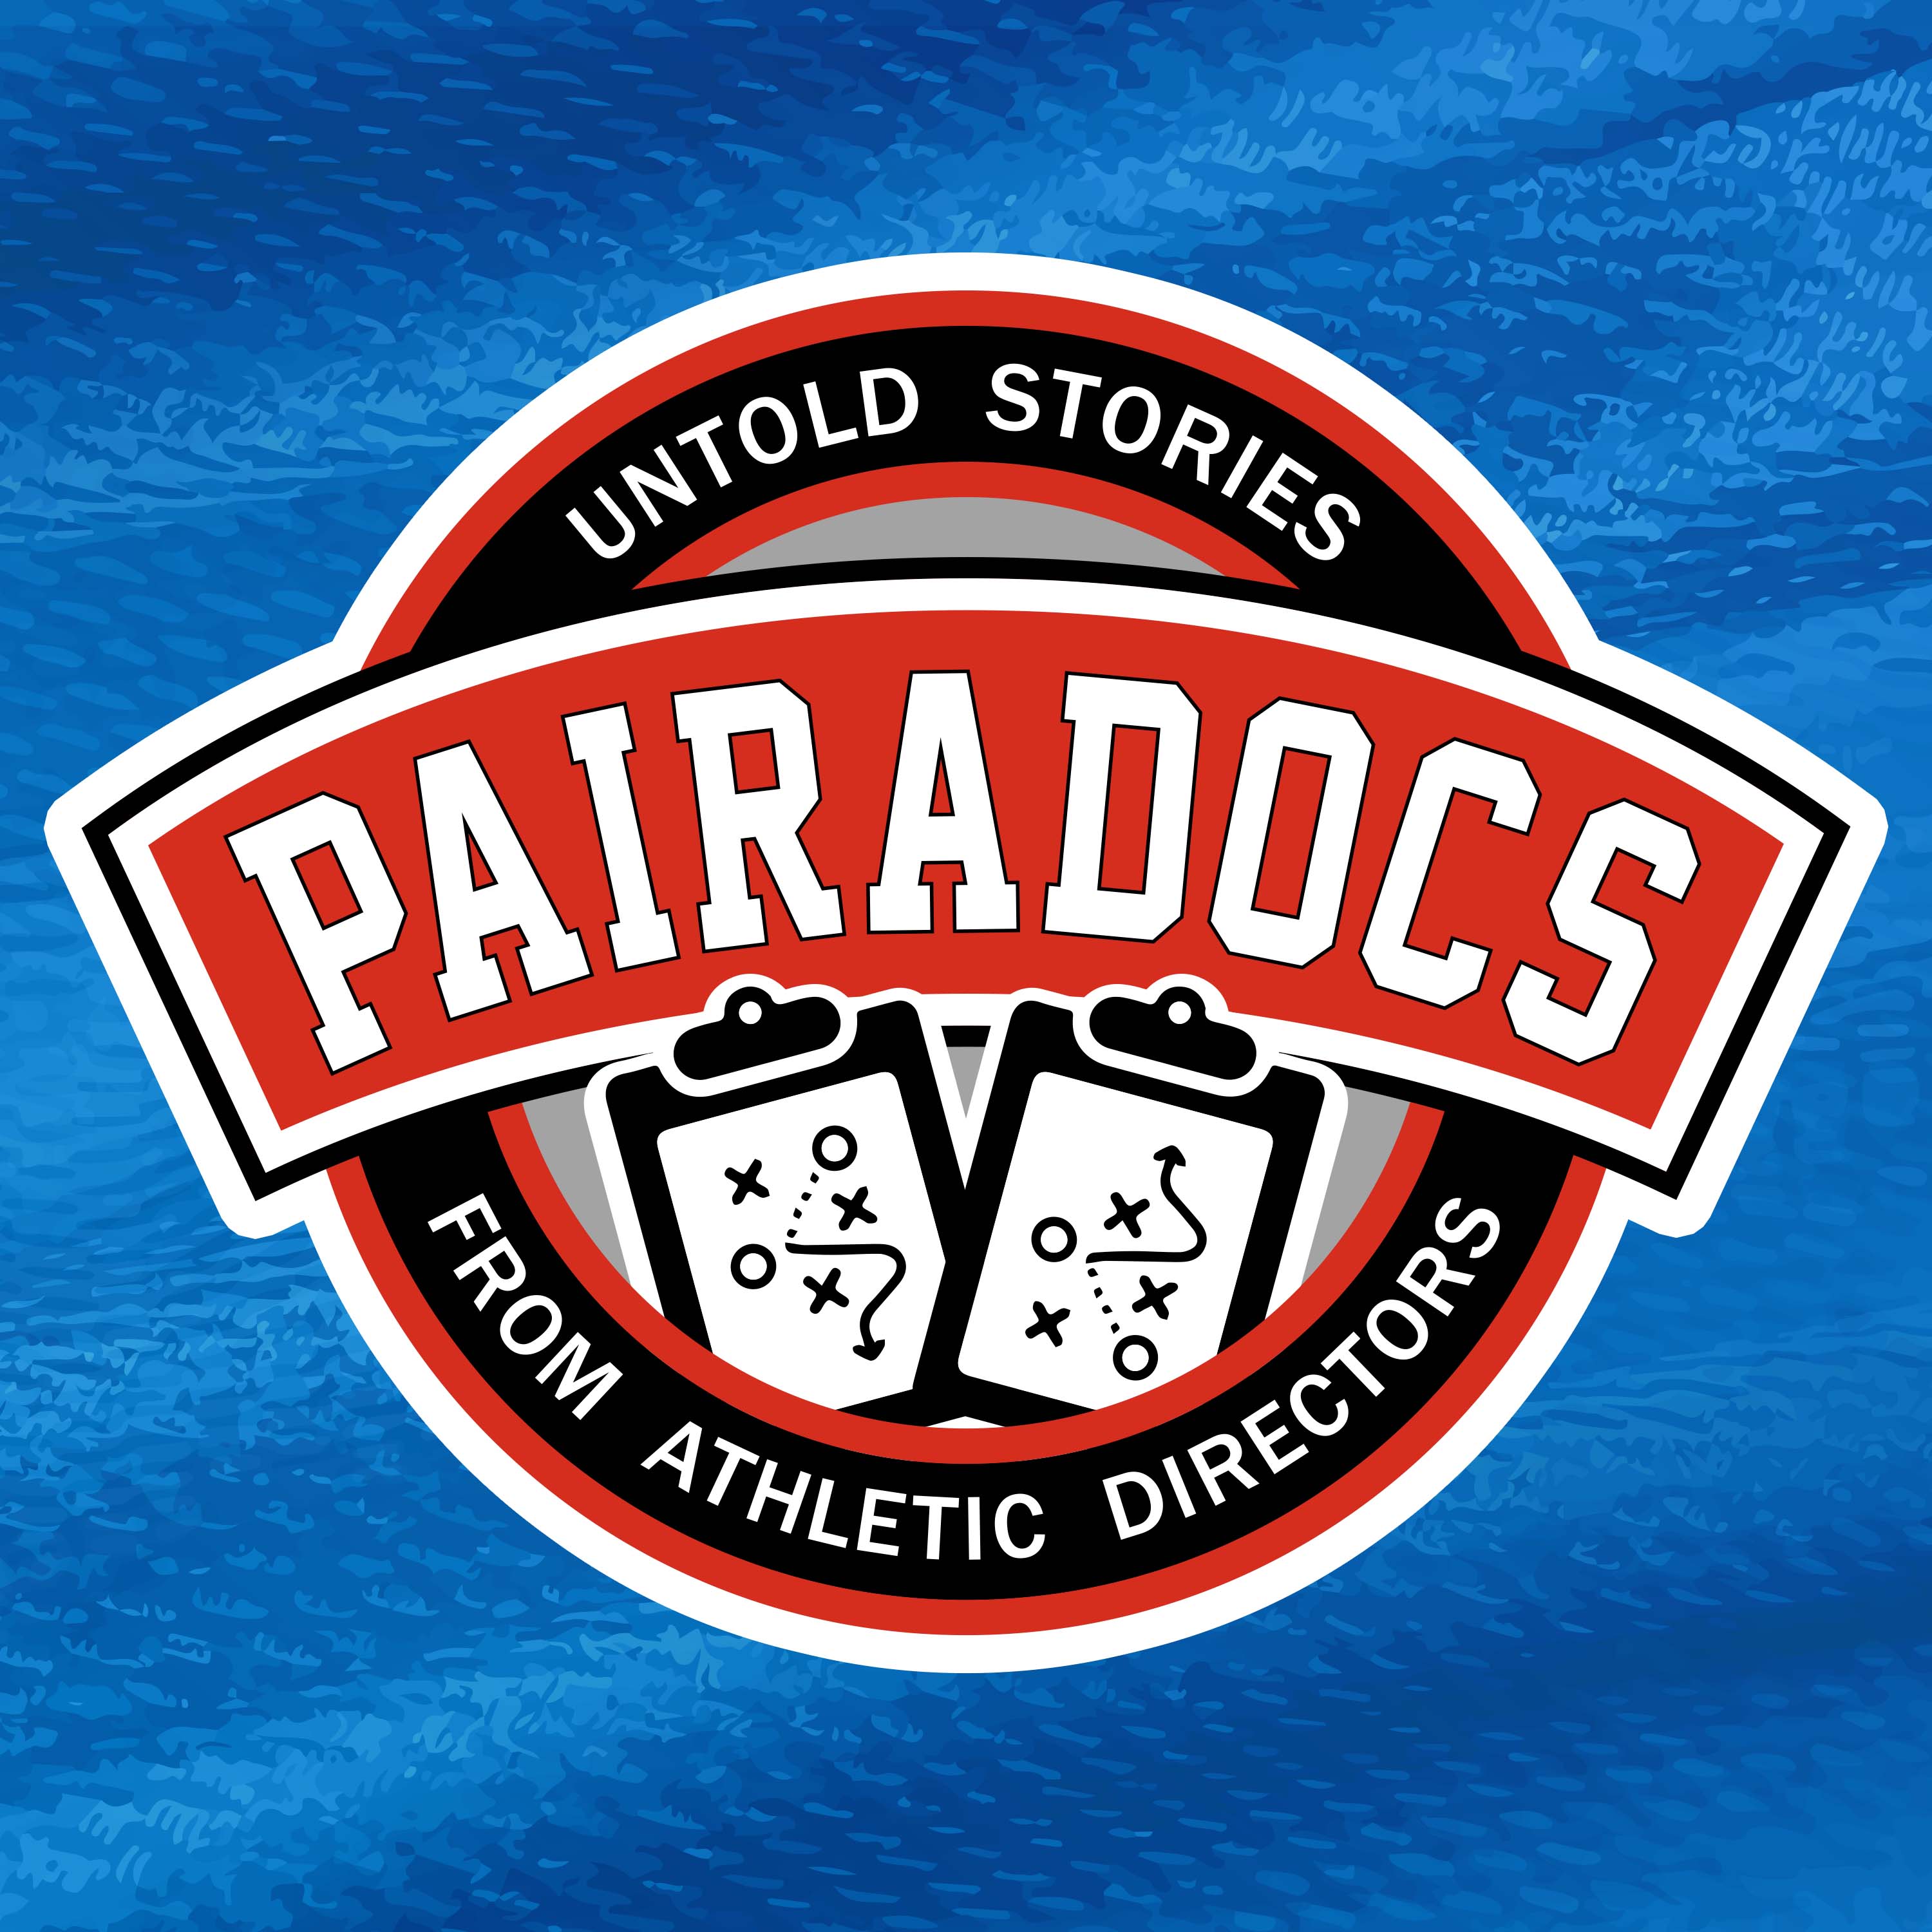 Artwork for Pairadocs: Untold Stories from Athletic Directors